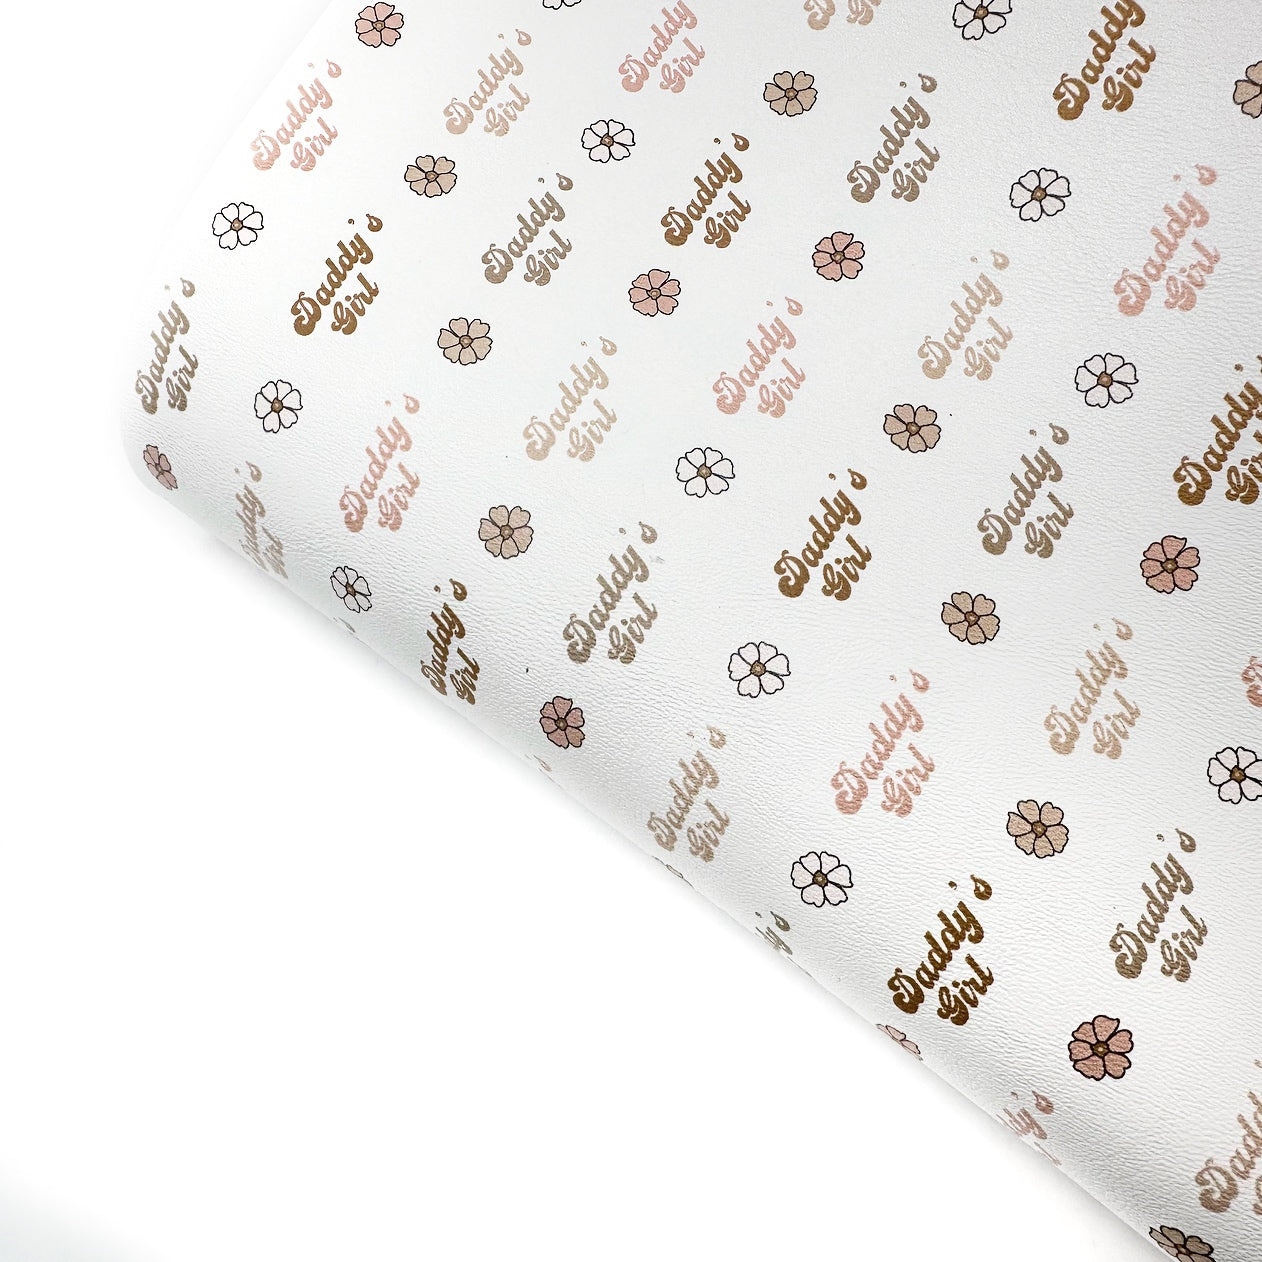 Daddy's Girl Boho Premium Faux Leather Fabric Sheets